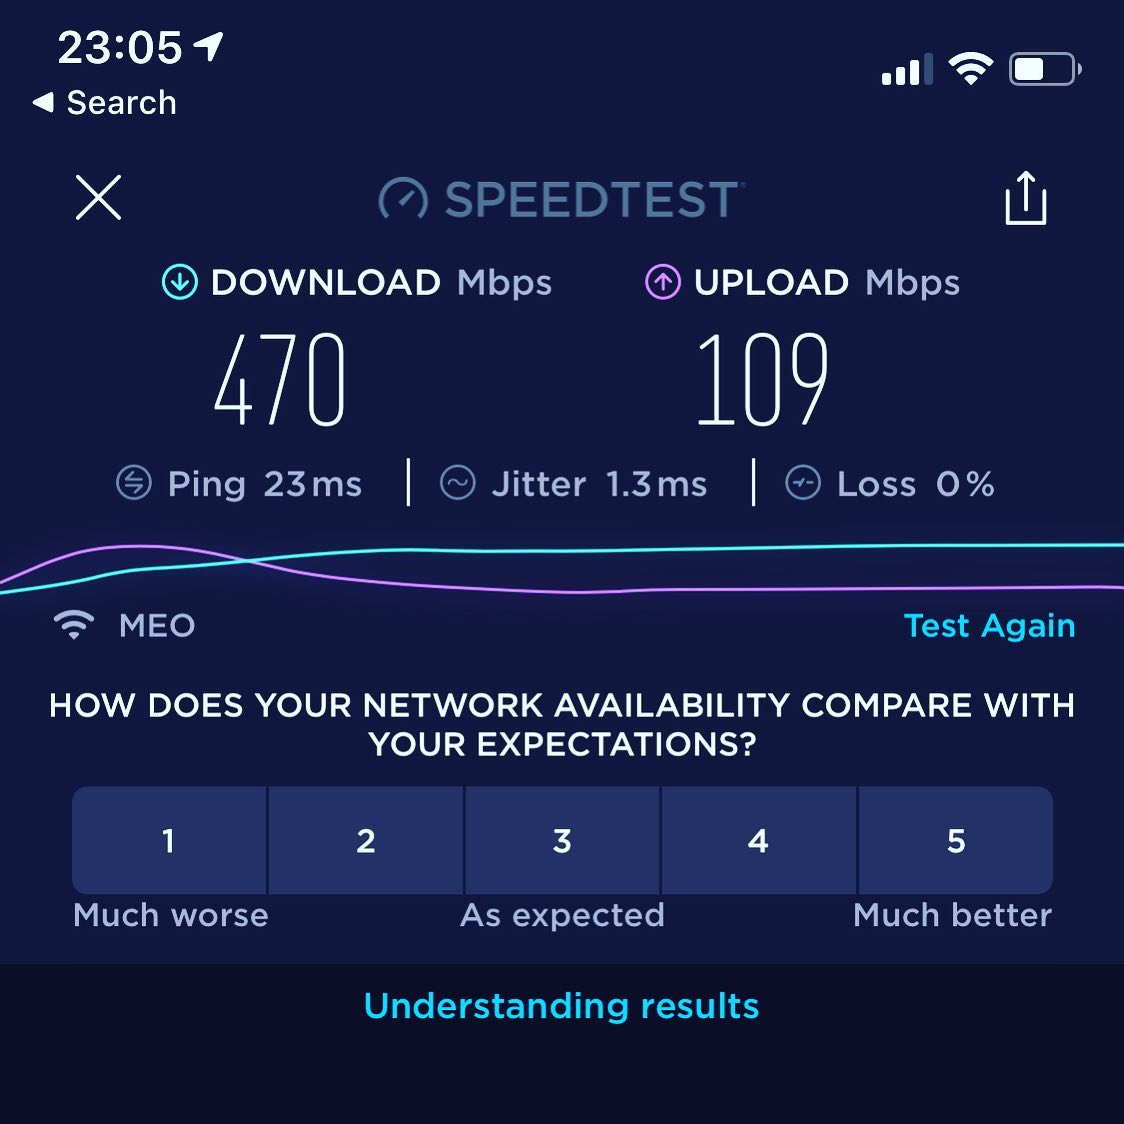 Not bad for a 500 Mb installation at the new house (tested over wi-fi)... fibre here is available up to 1 Gig but opted for 500 as I won’t be here much